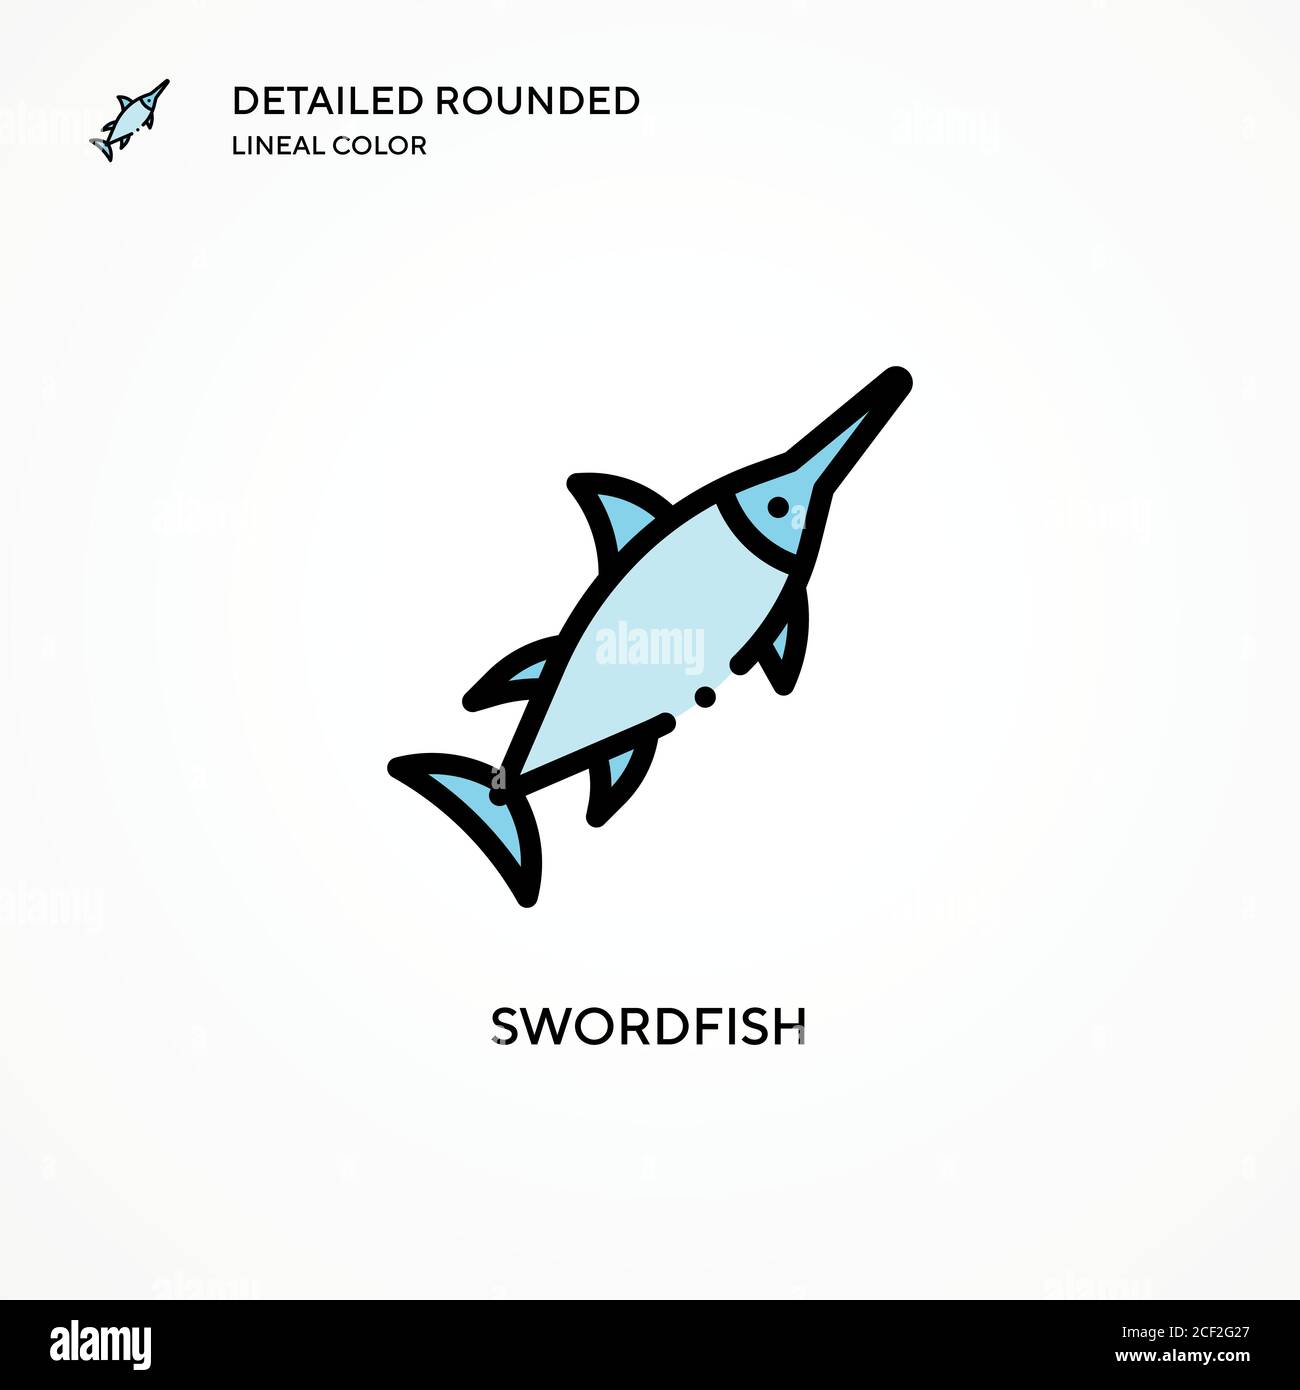 Swordfish vector icon. Modern vector illustration concepts. Easy to edit and customize. Stock Vector